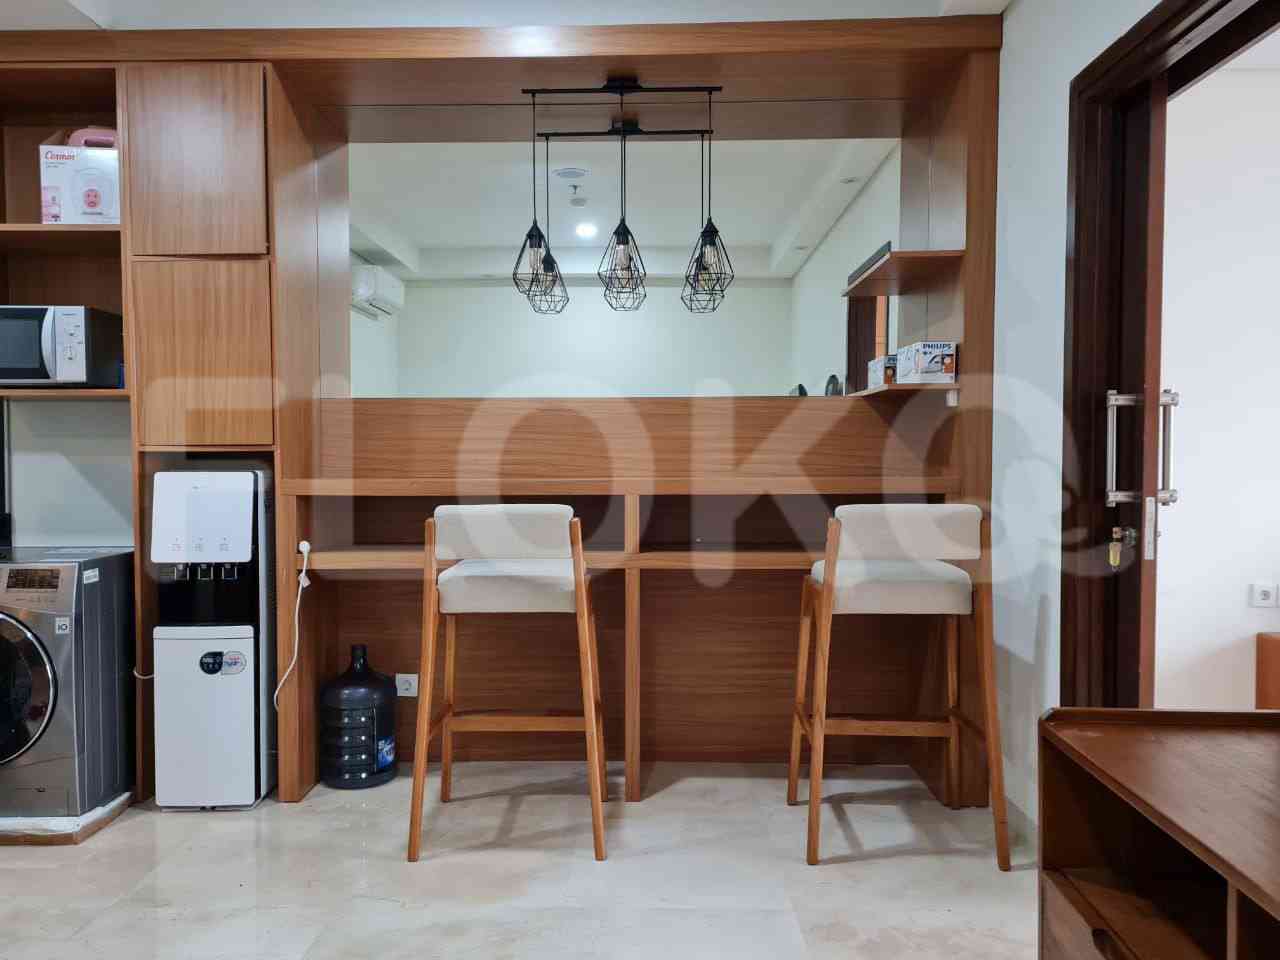 2 Bedroom on 18th Floor for Rent in Lavanue Apartment - fpa481 3